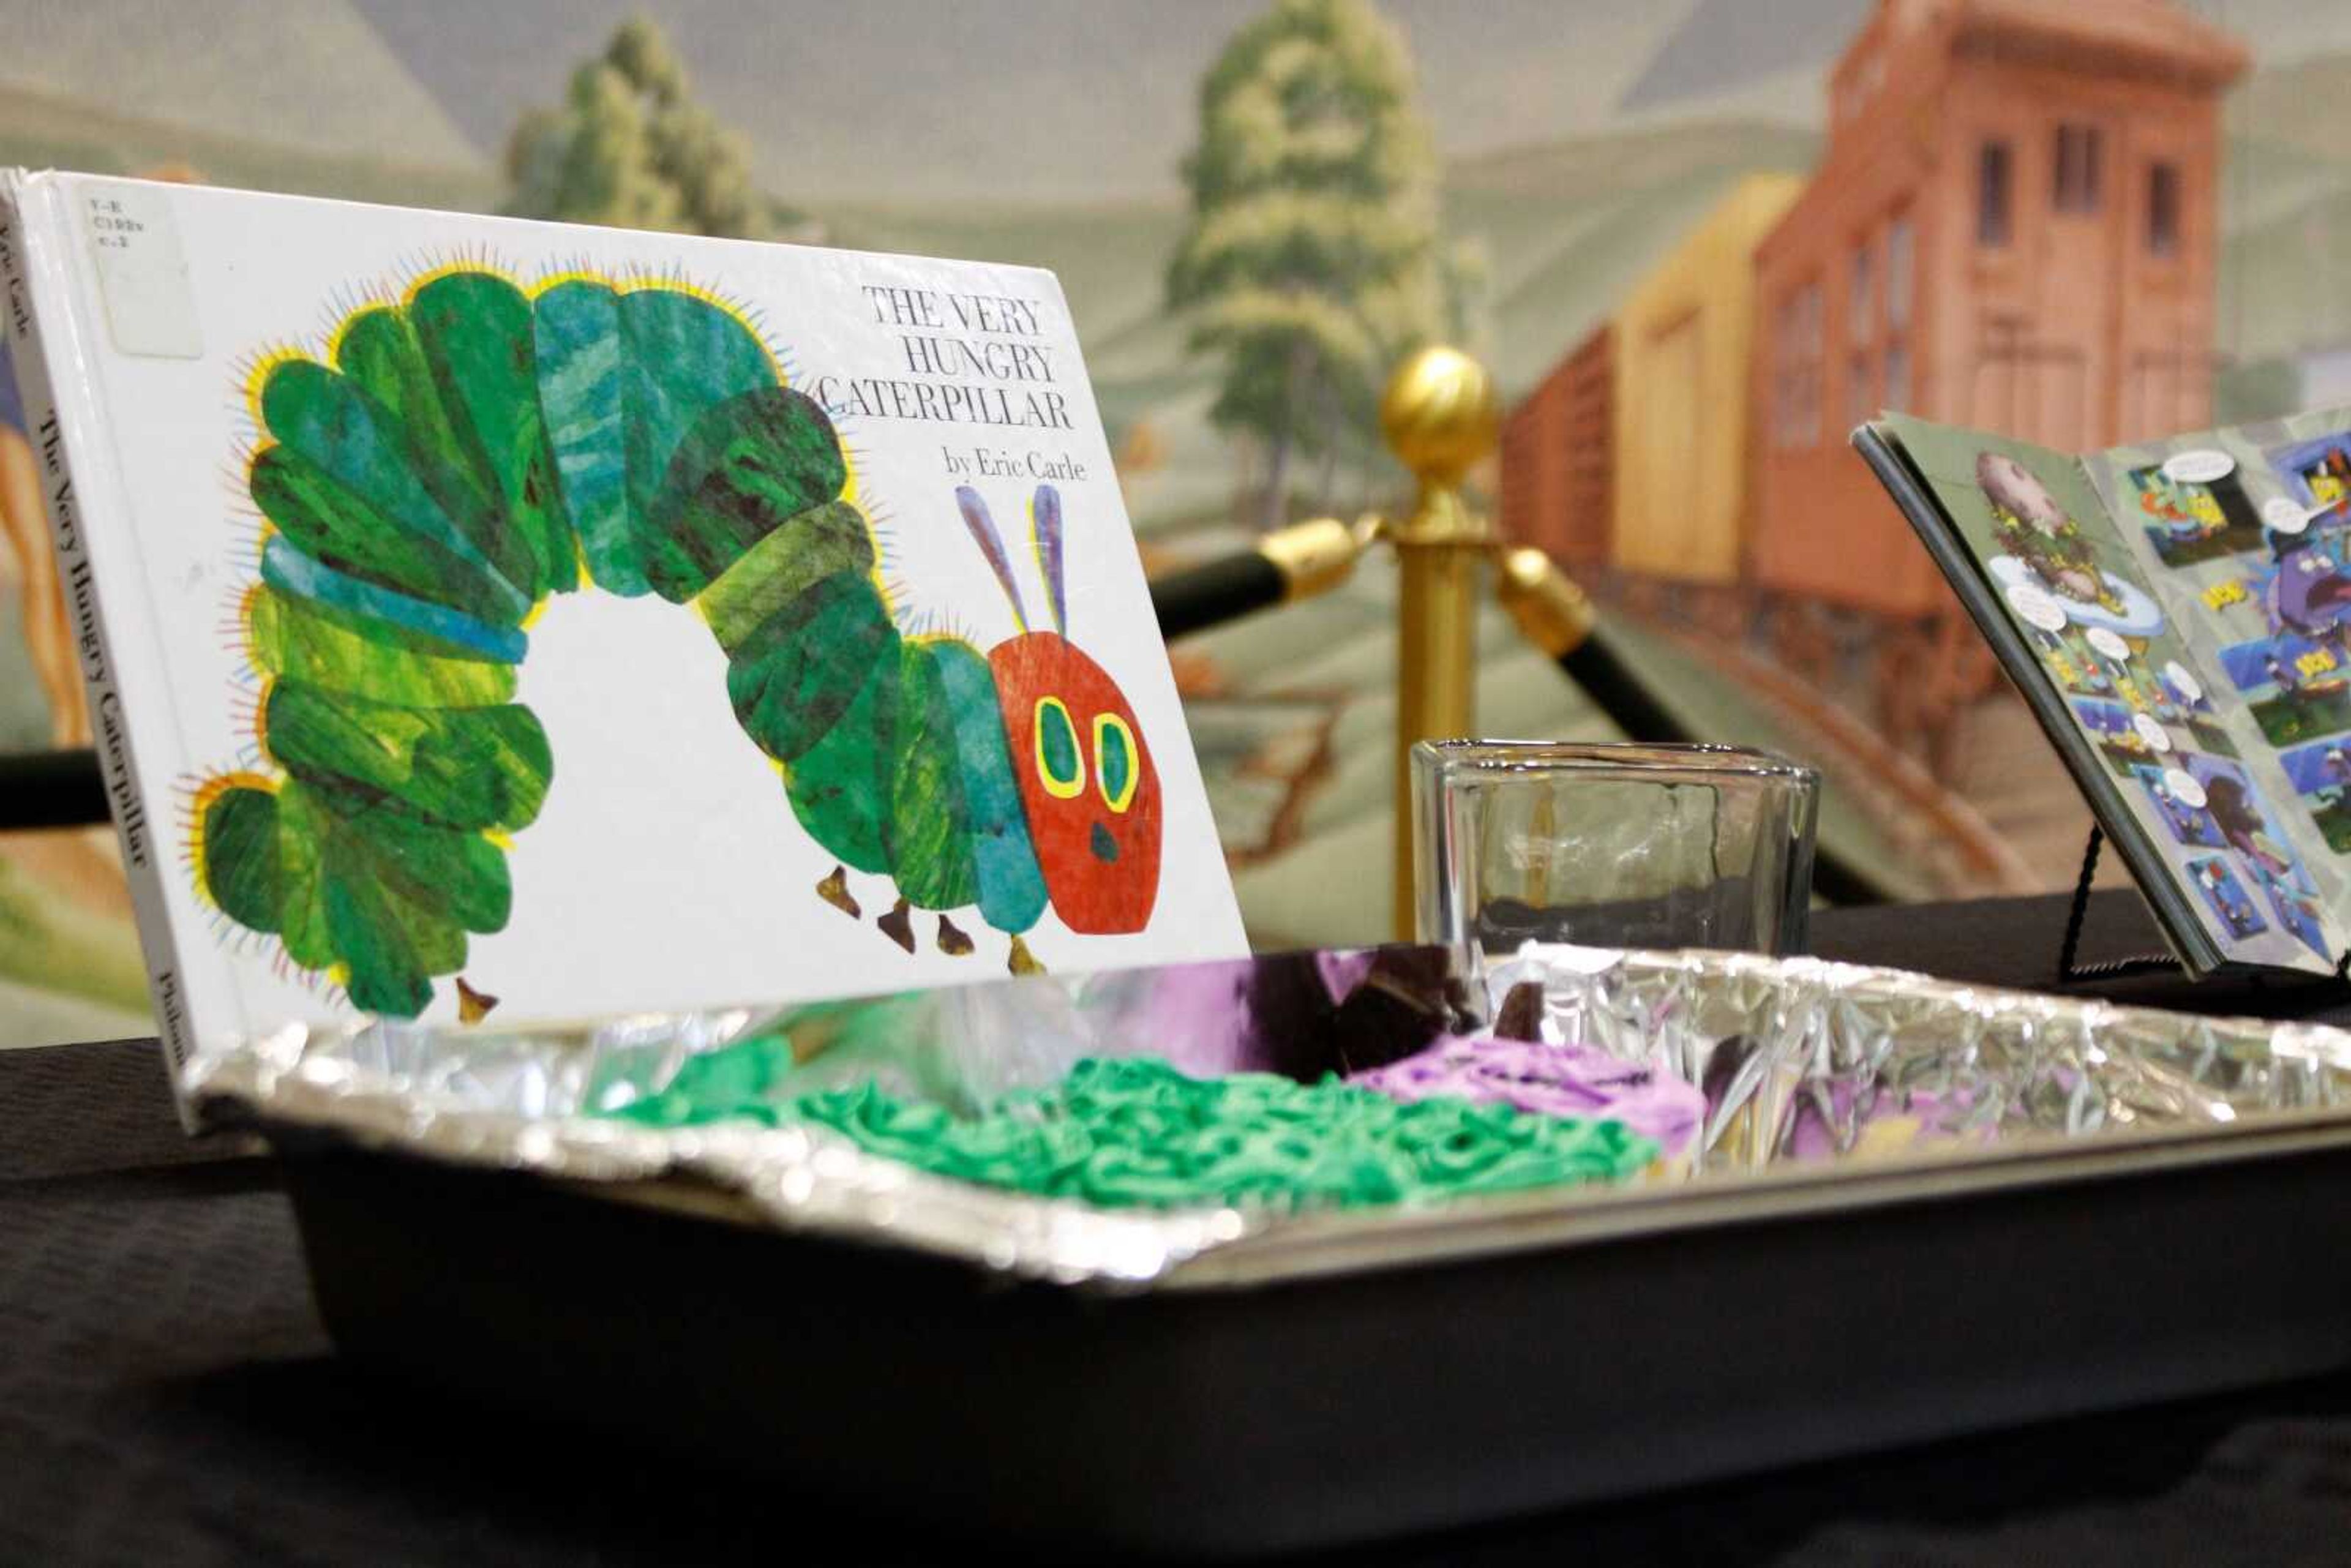 One faculty member creates “The Very Hungry Caterpillar” in food. 